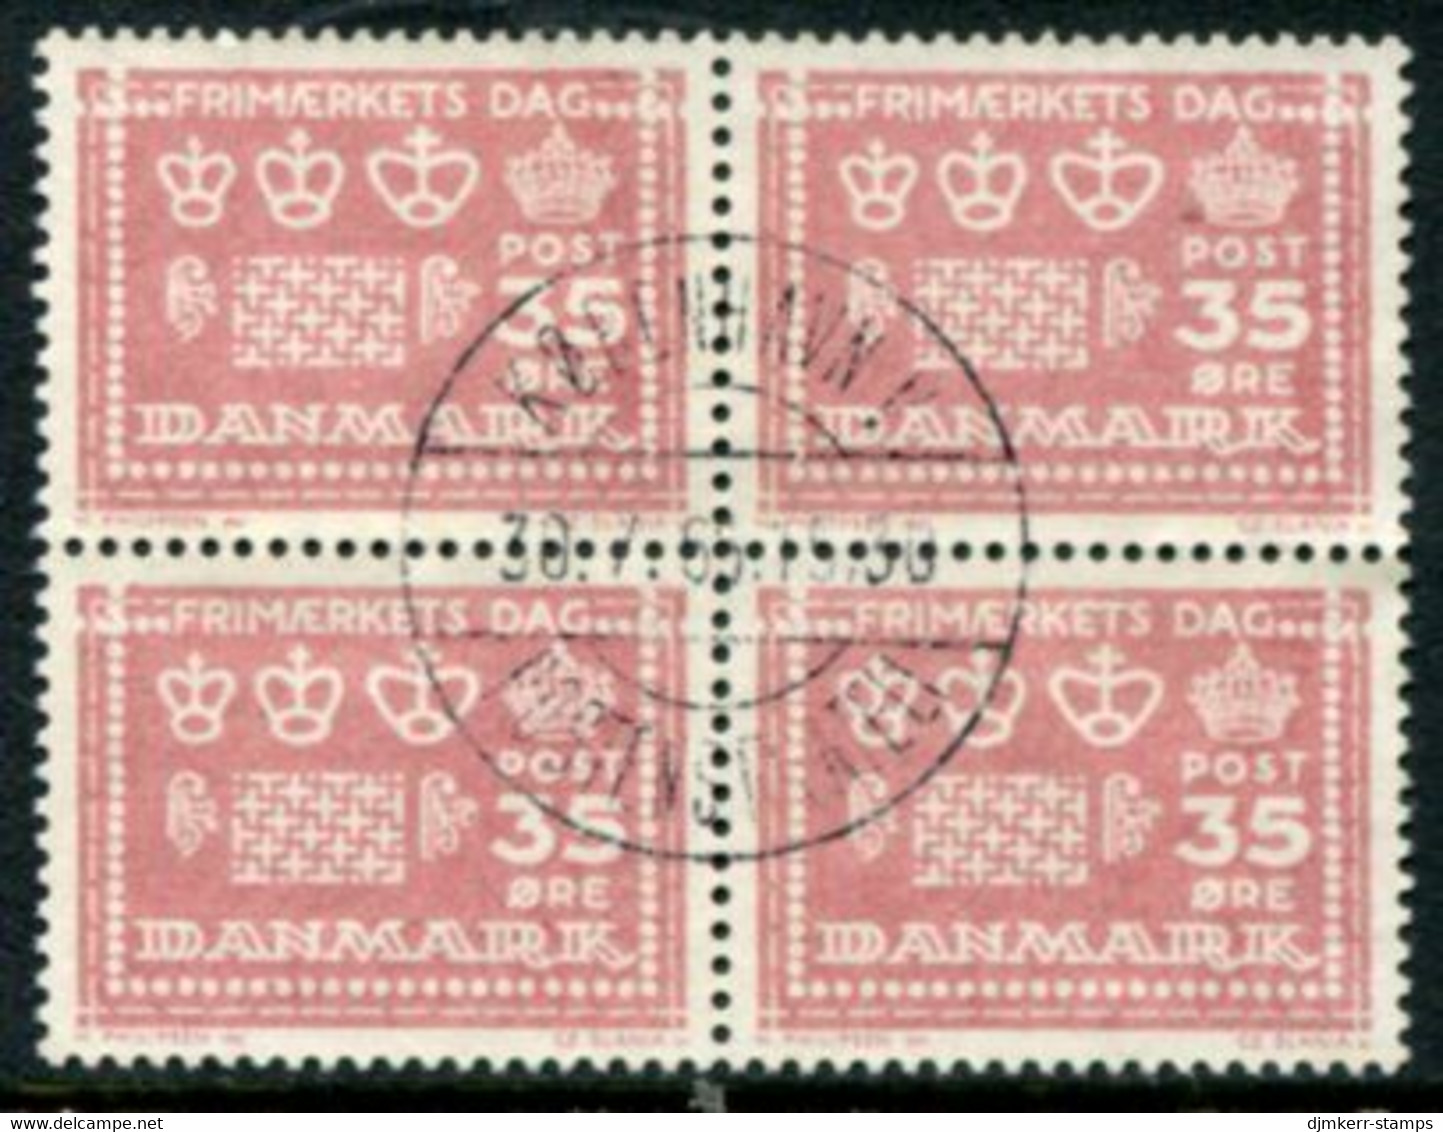 DENMARK 1964 Stamp Day Block Of 4 Used   Michel 425y - Oblitérés